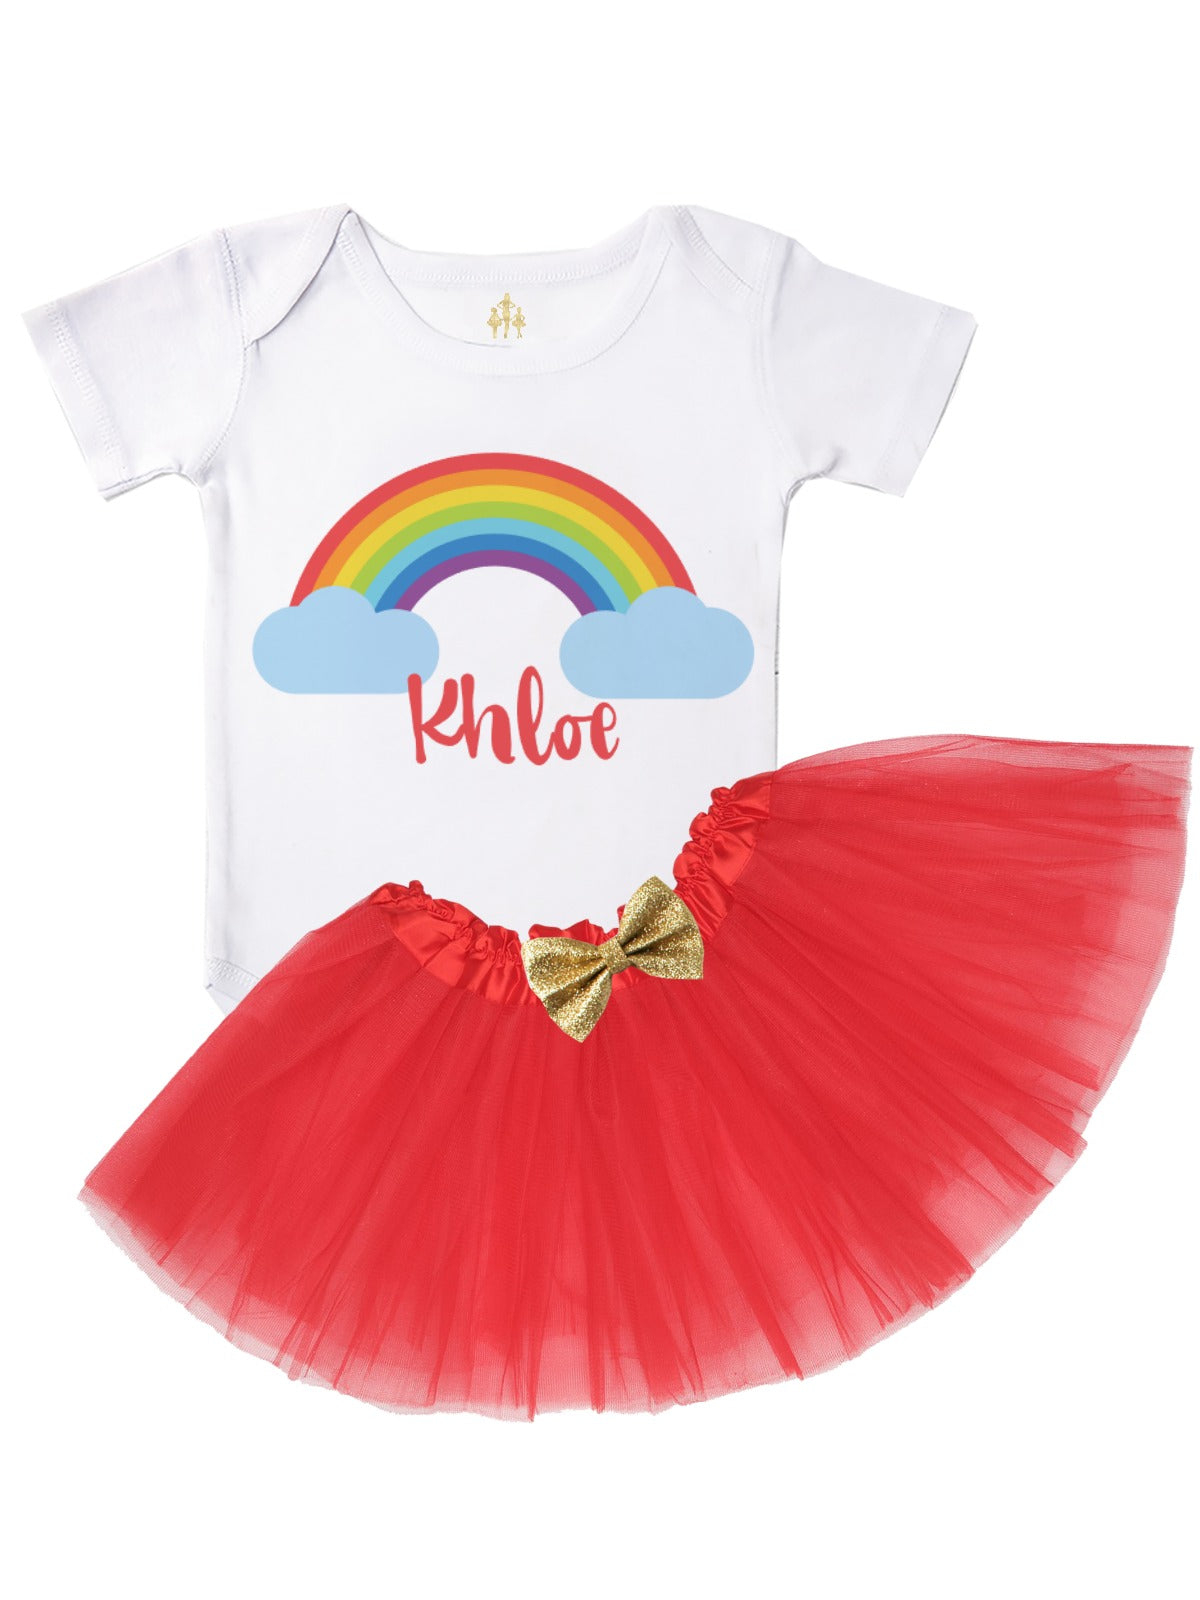 Personalized Rainbow Tutu Outfit in Red